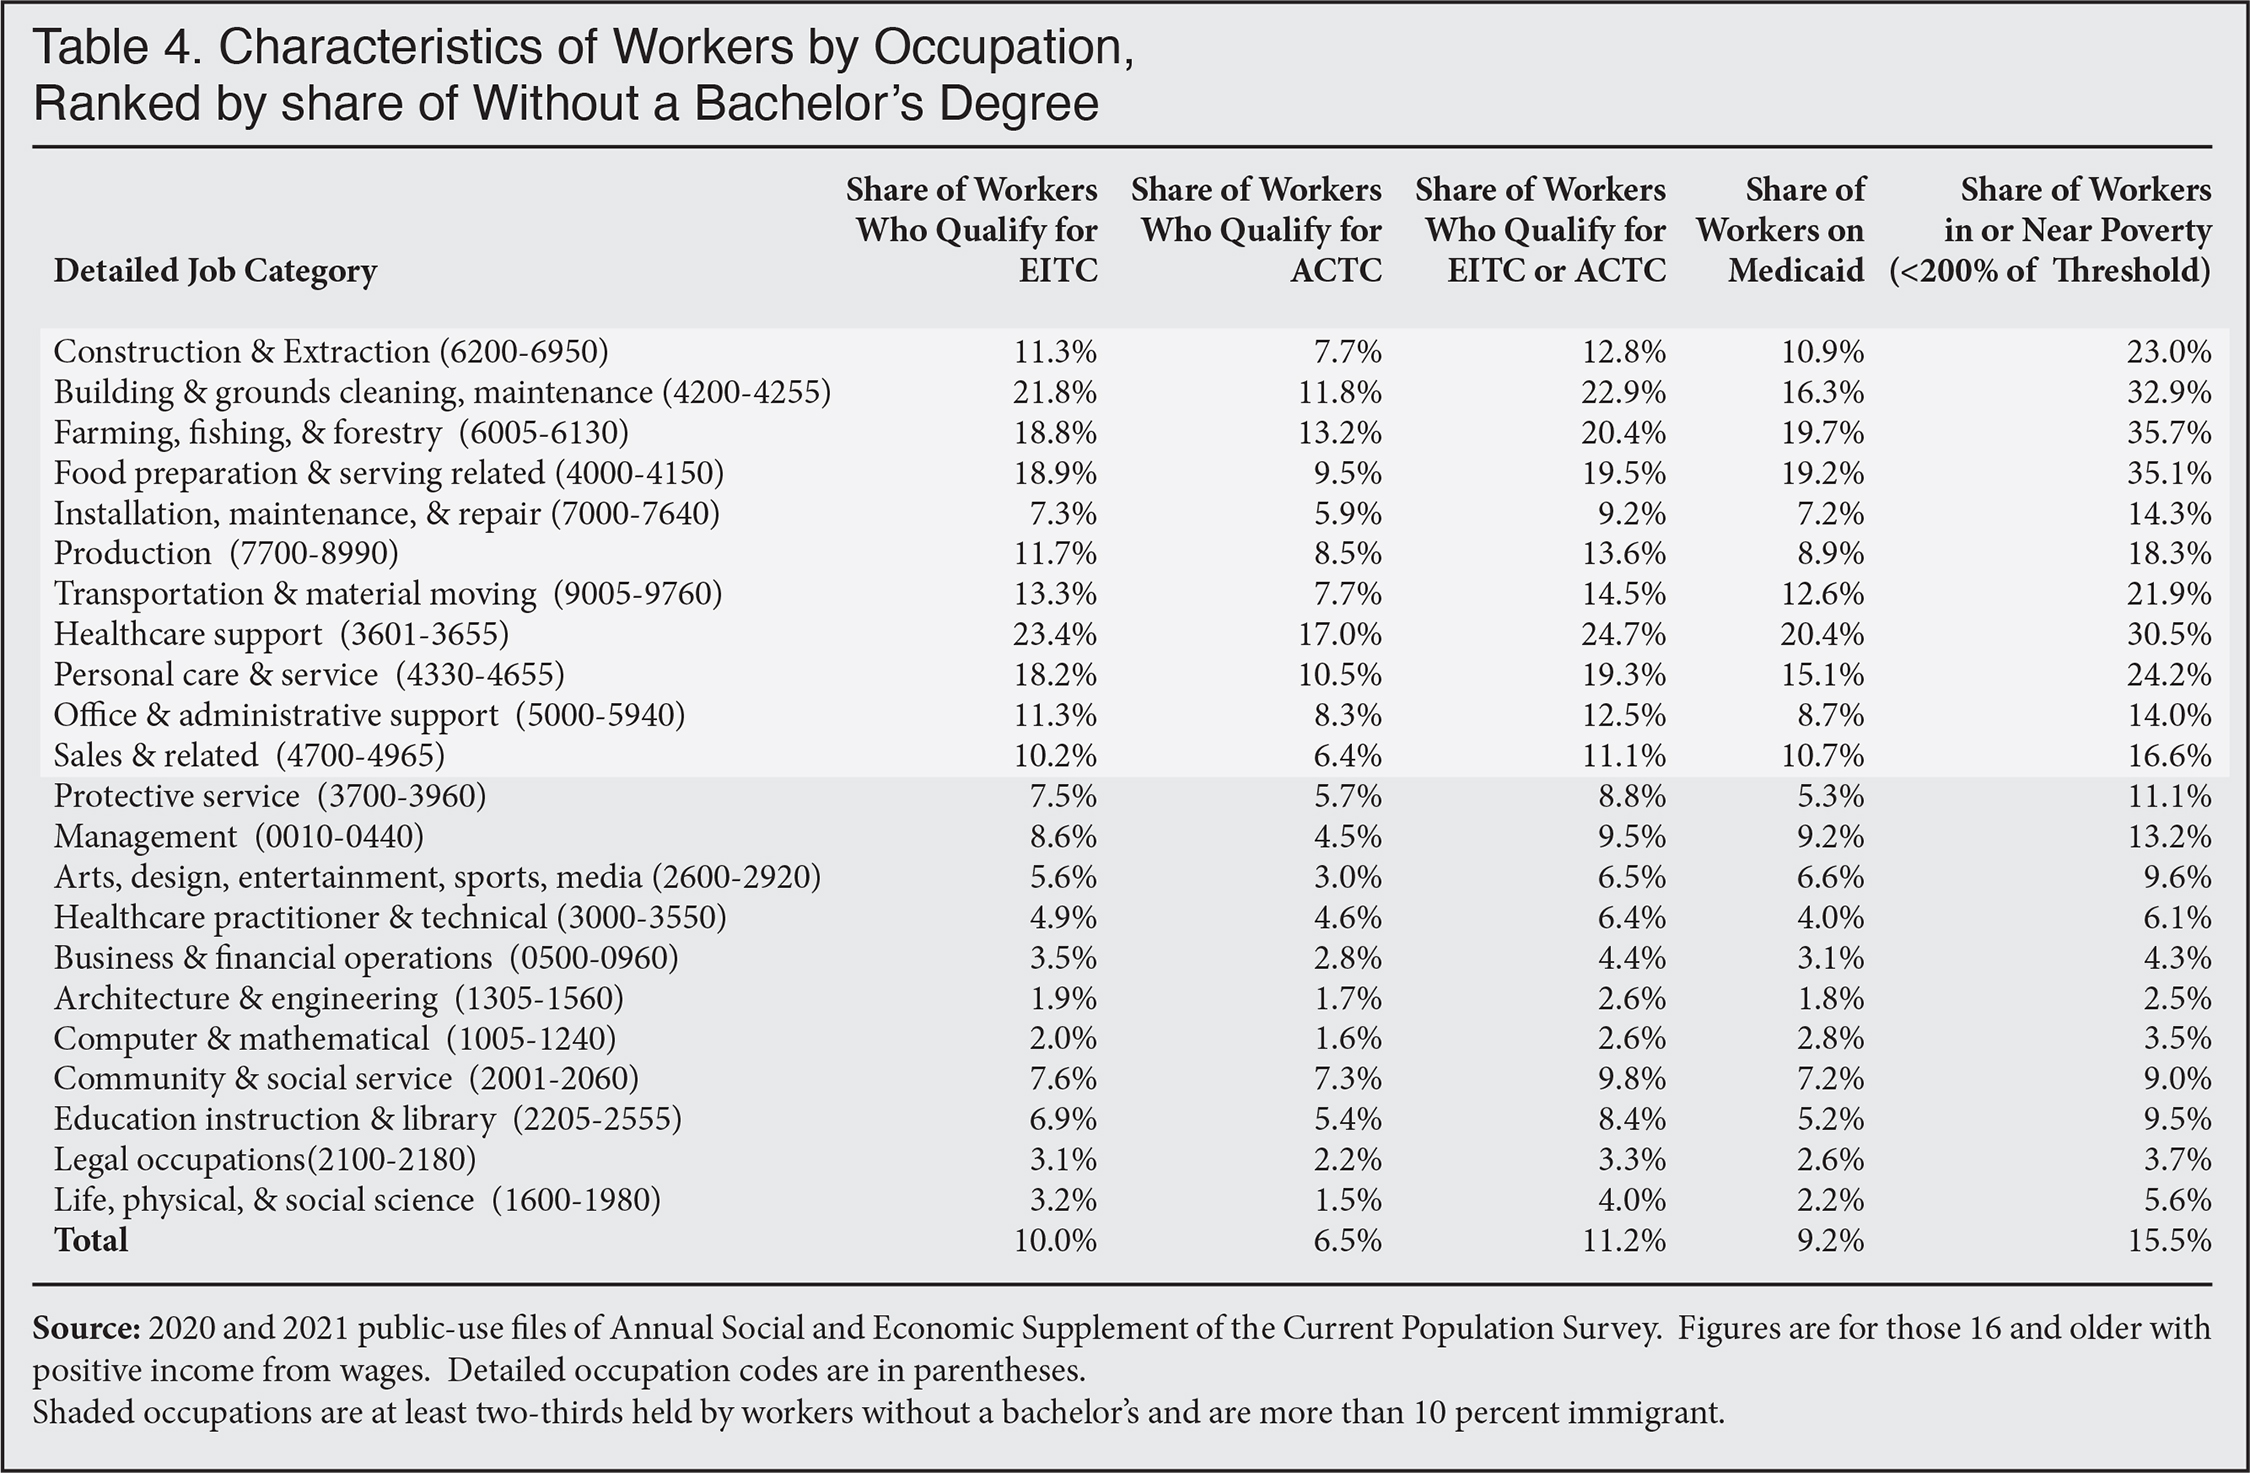 Table: Characteristics of Workers by Occupation